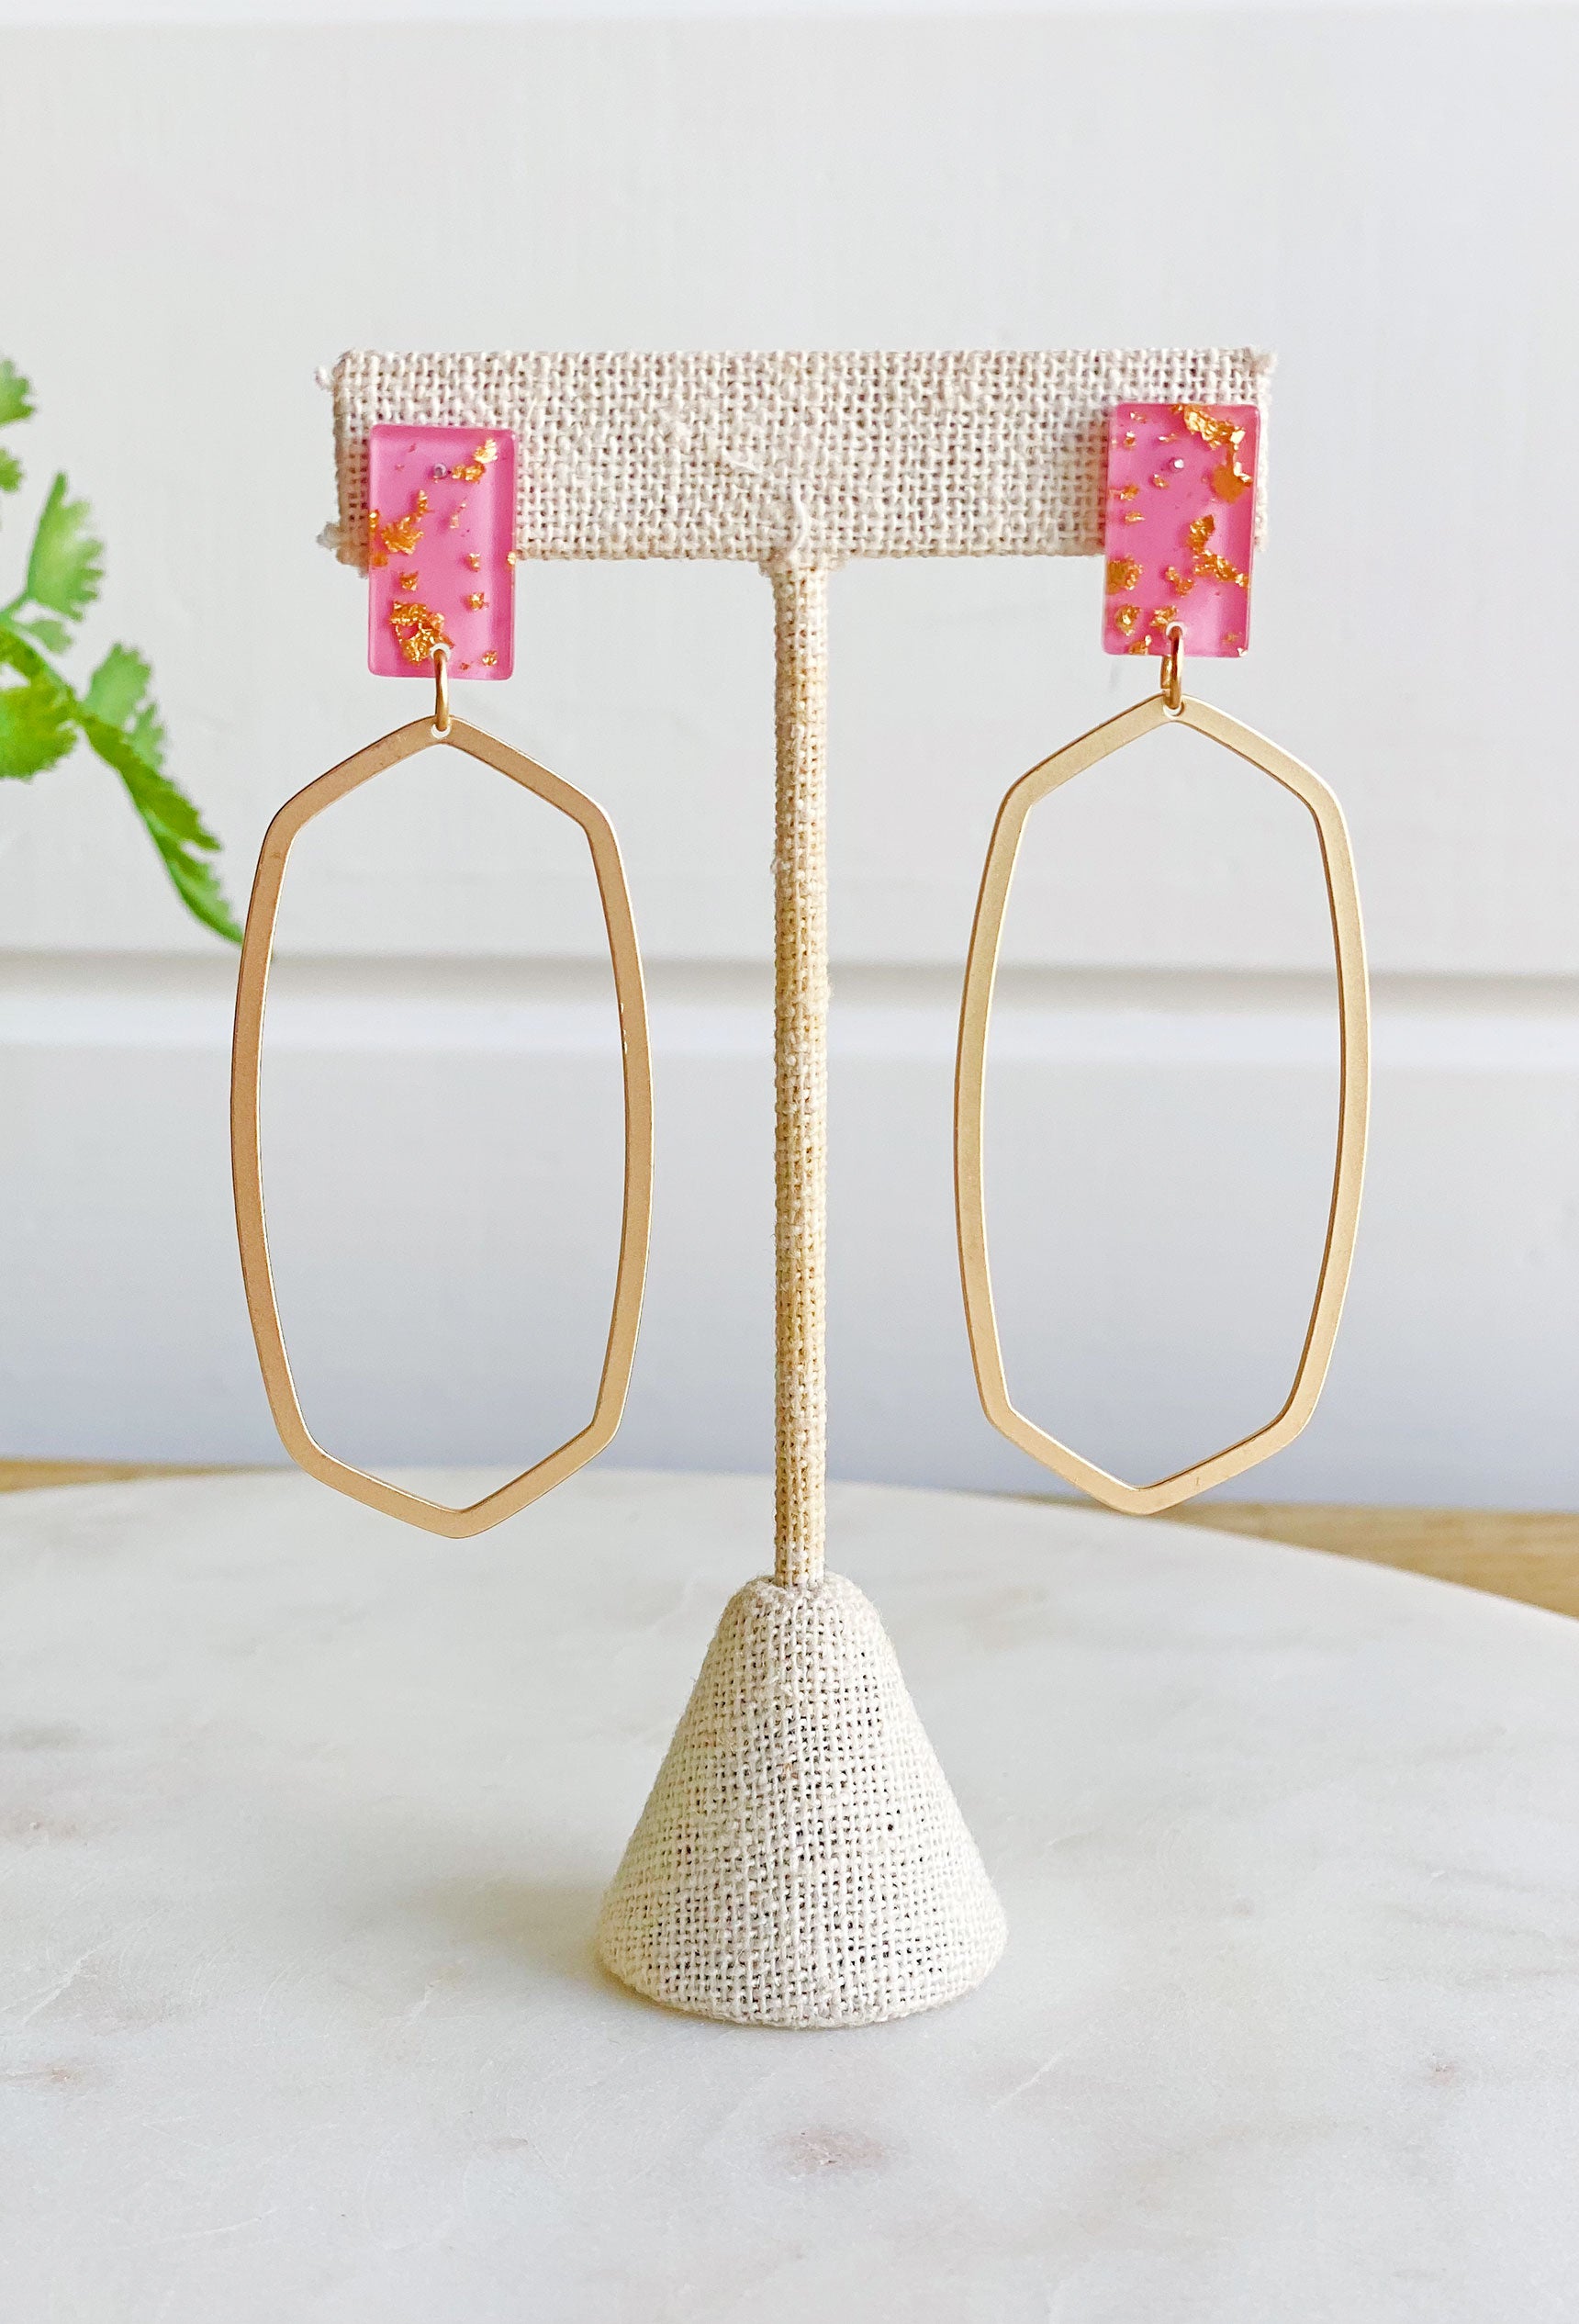 Changed My Mind Earrings in Pink, gold earrings with pink and gold resin rectangle detail